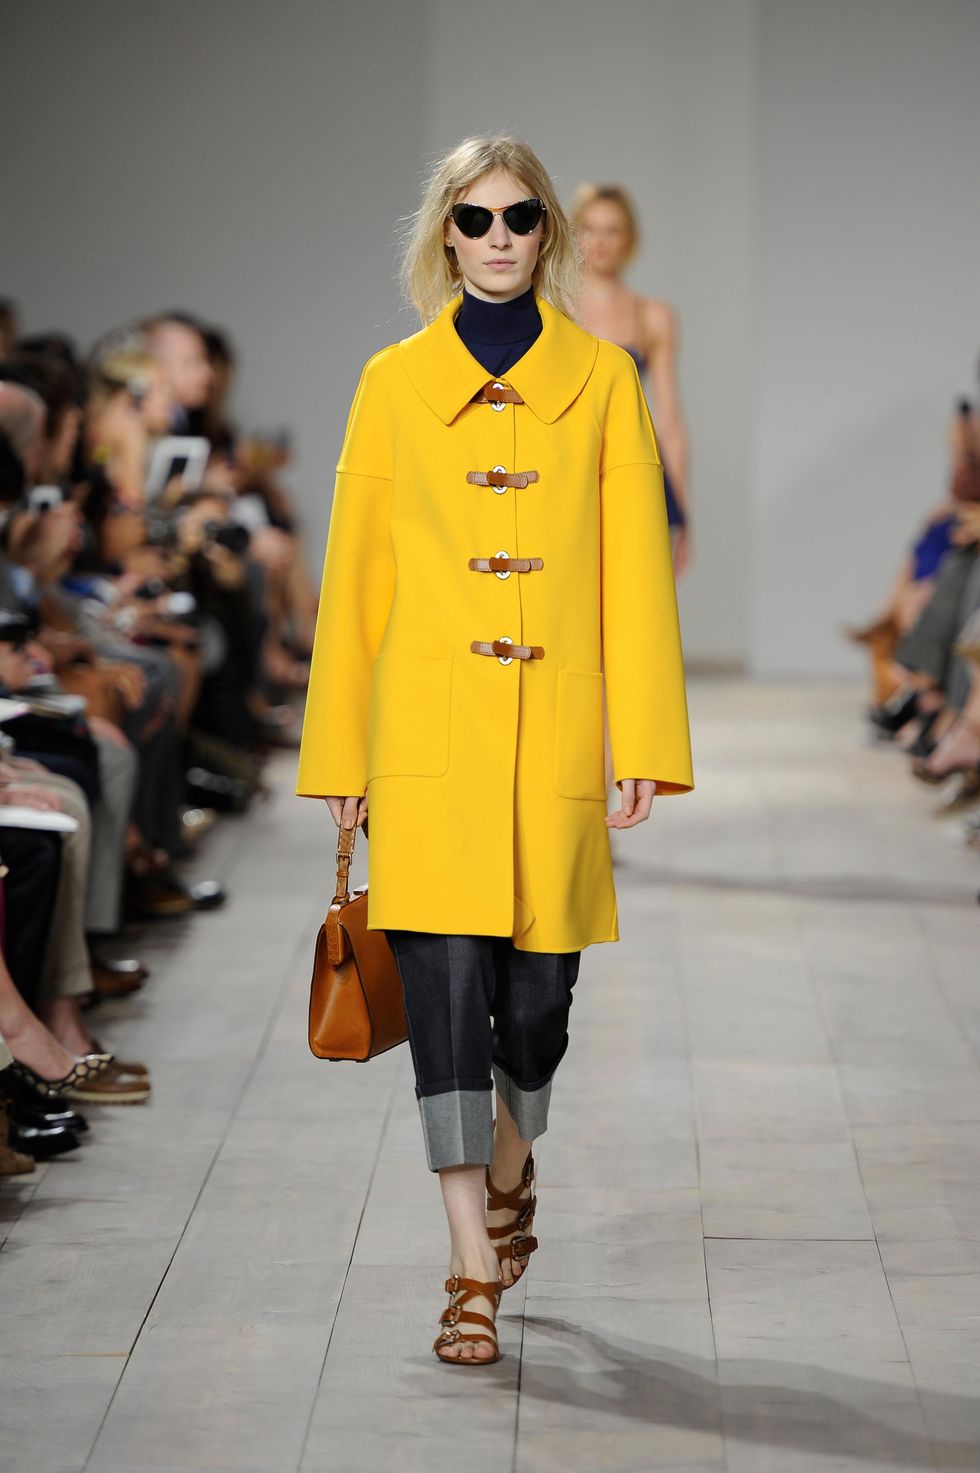 Michael Kors spring 2015 look 7 daffodil coat and cropped jean